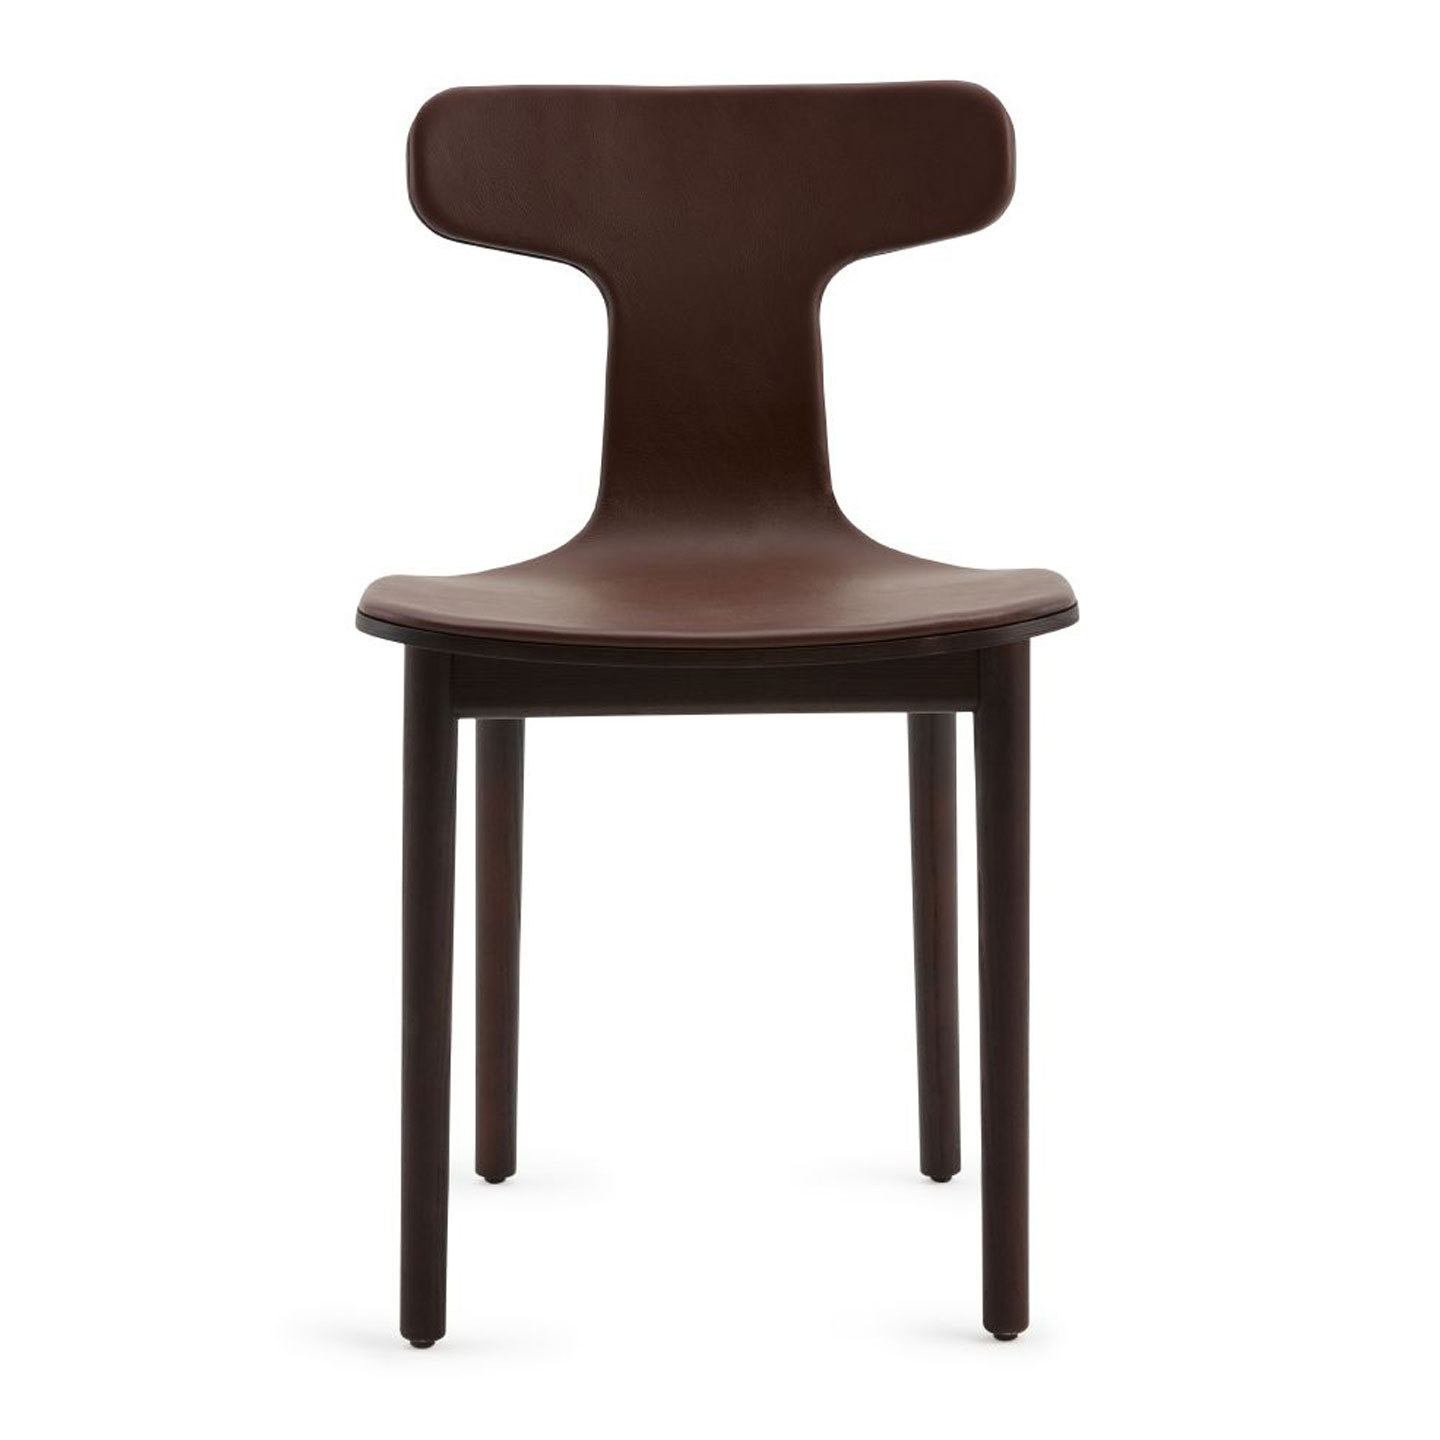 Haworth Bac One chair in dark brown front angle